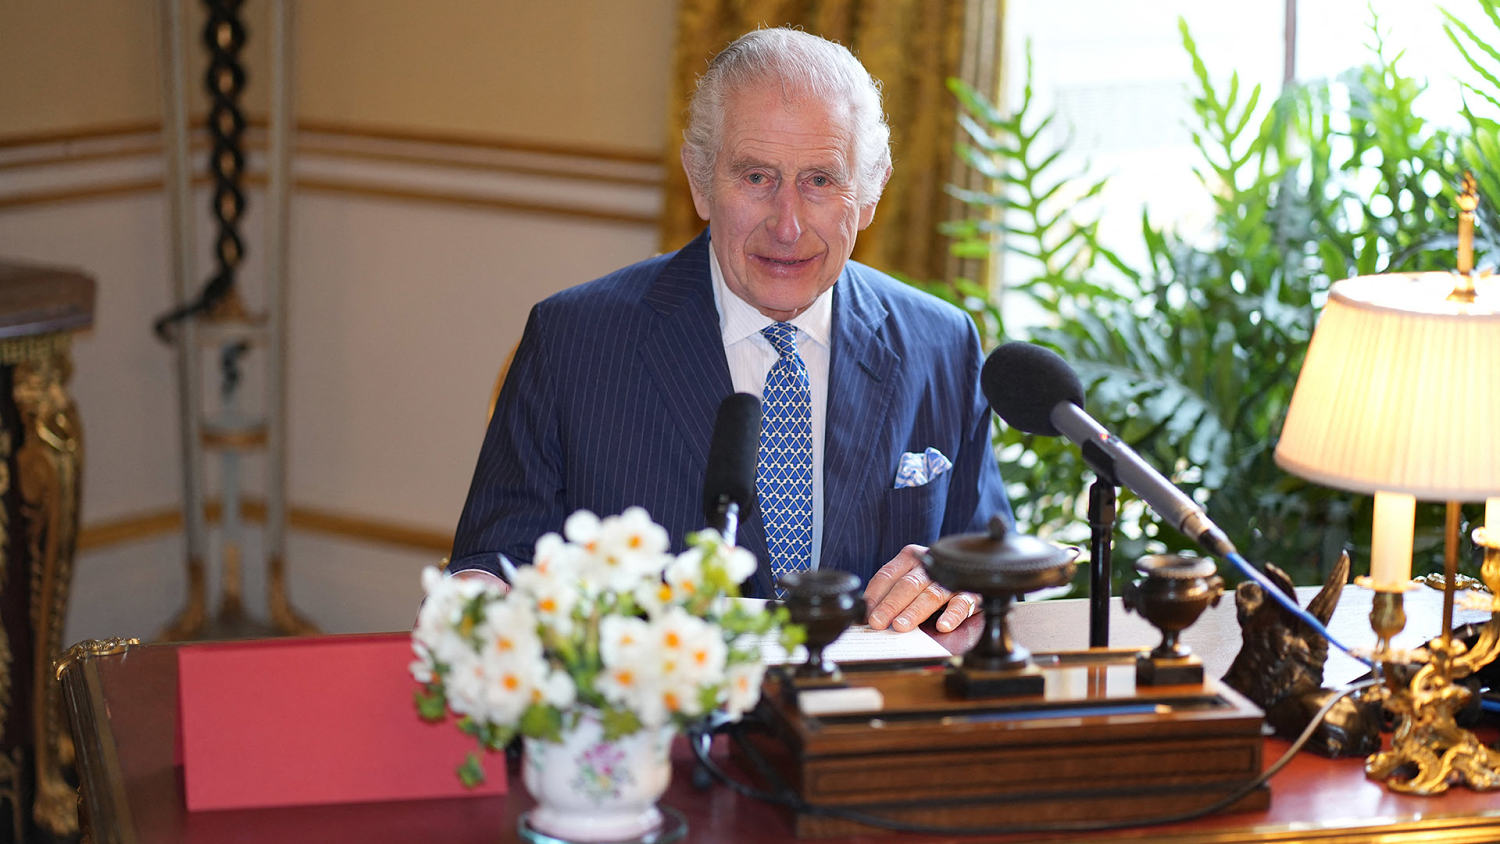 Britain's King Charles praises 'hand of friendship' in an Easter message